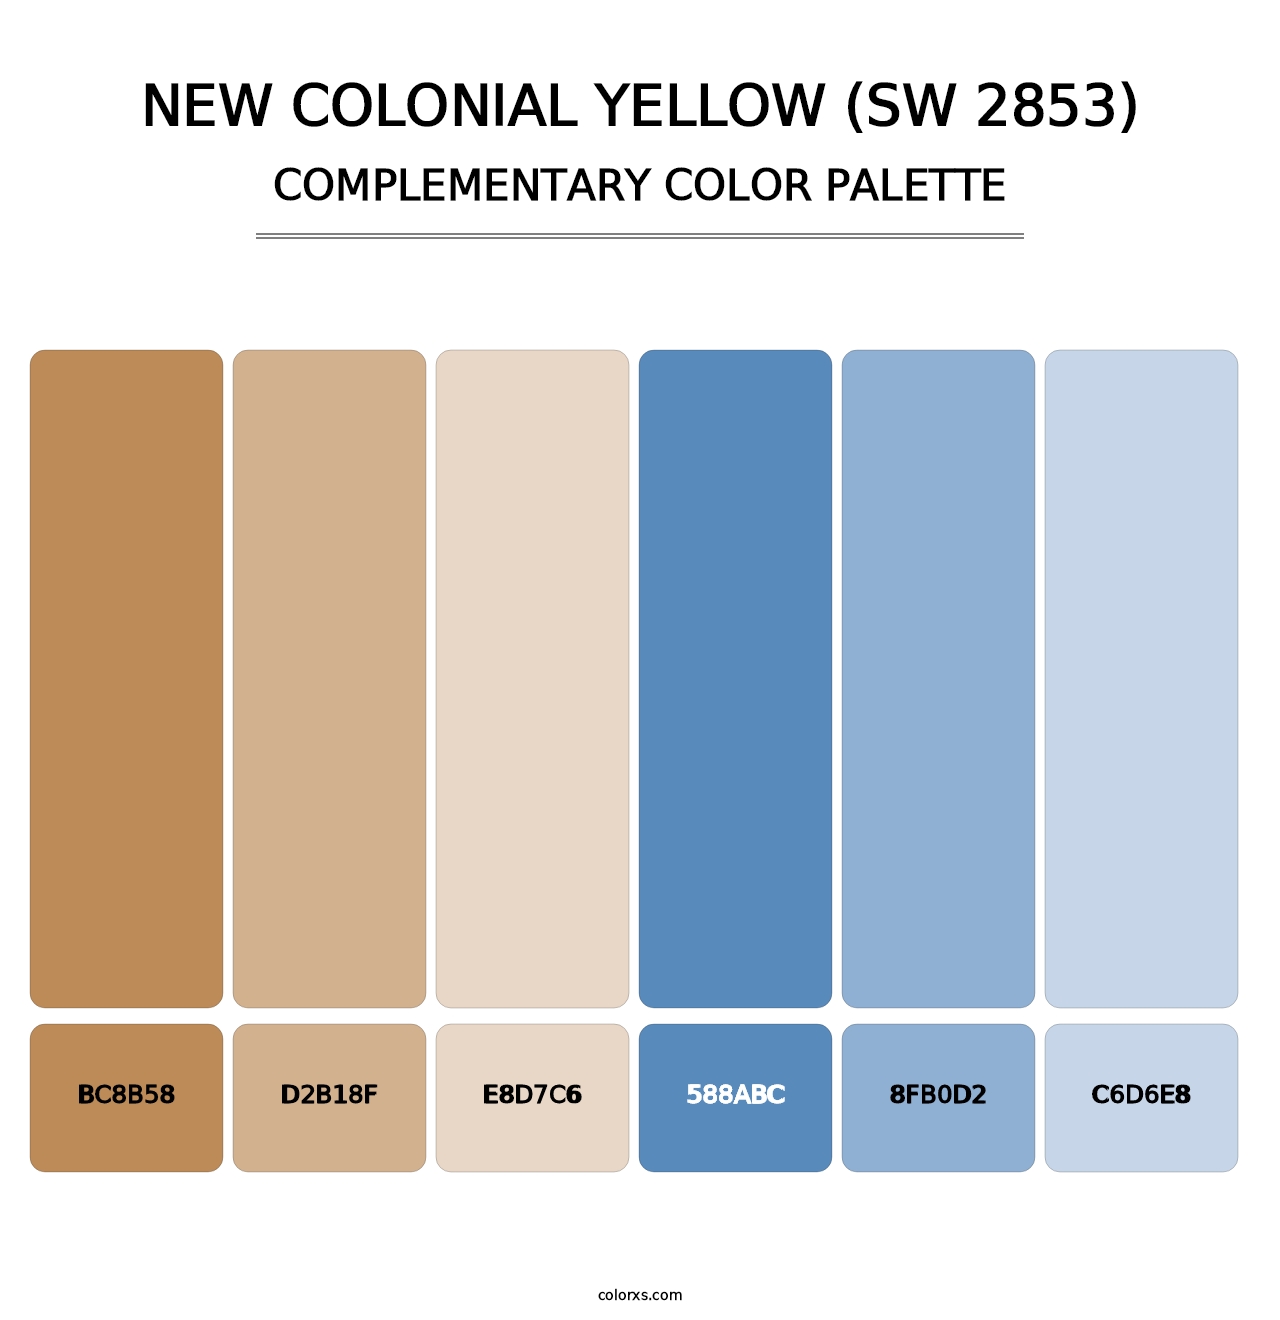 New Colonial Yellow (SW 2853) - Complementary Color Palette